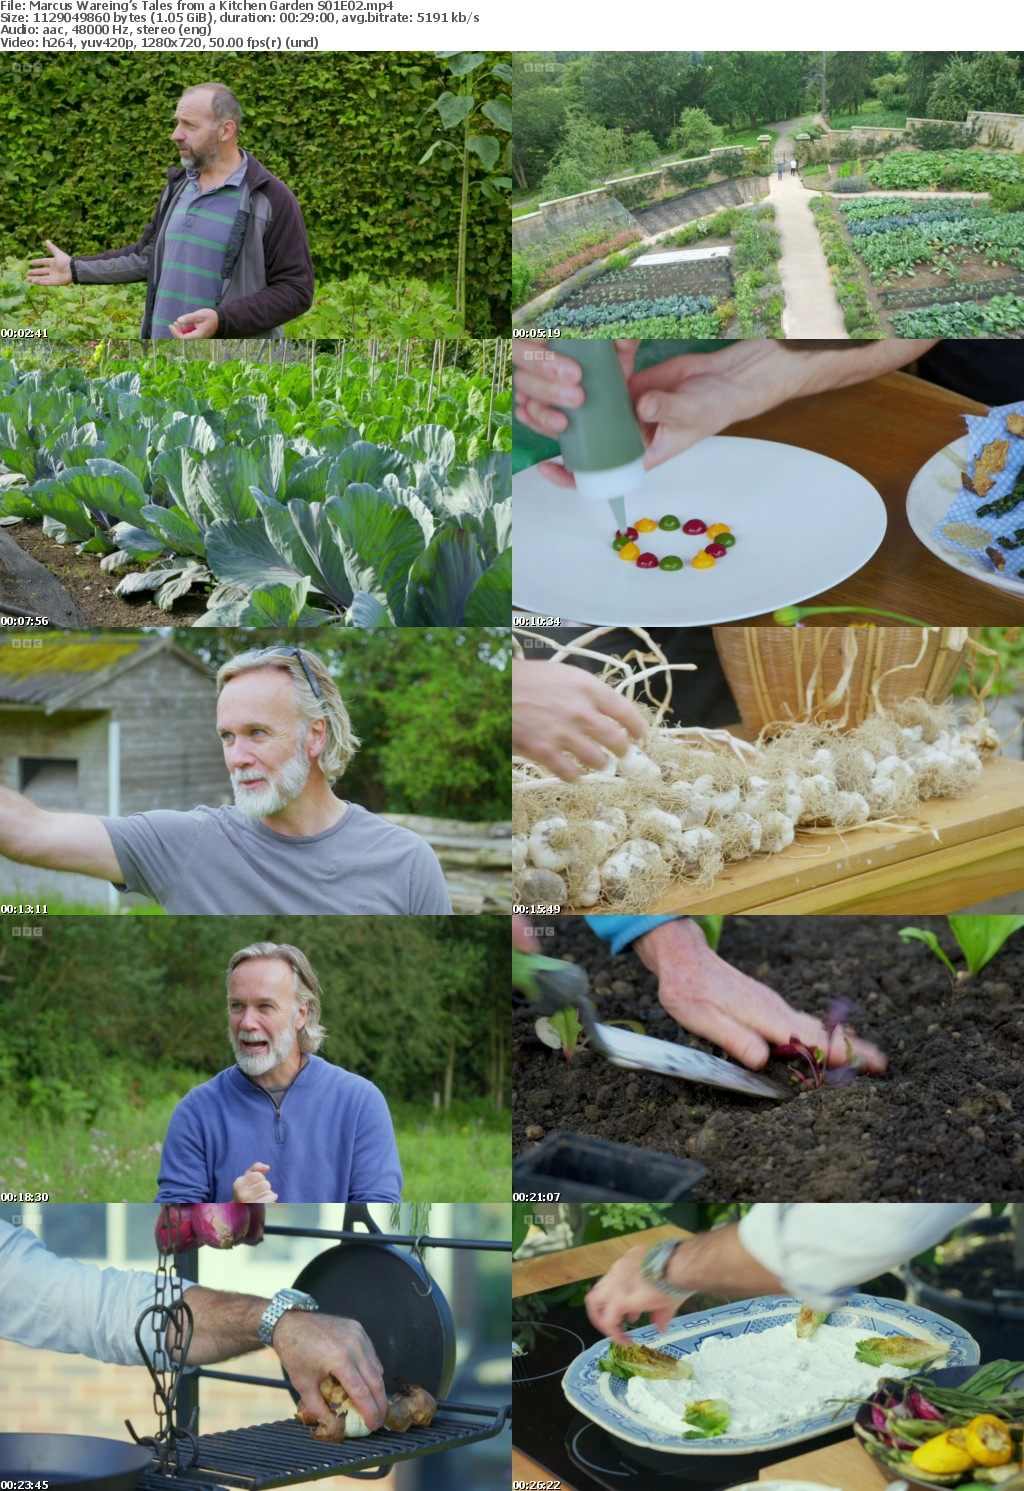 Marcus Wareings Tales from a Kitchen Garden S01E02 (1280x720p HD, 50fps, soft Eng subs)